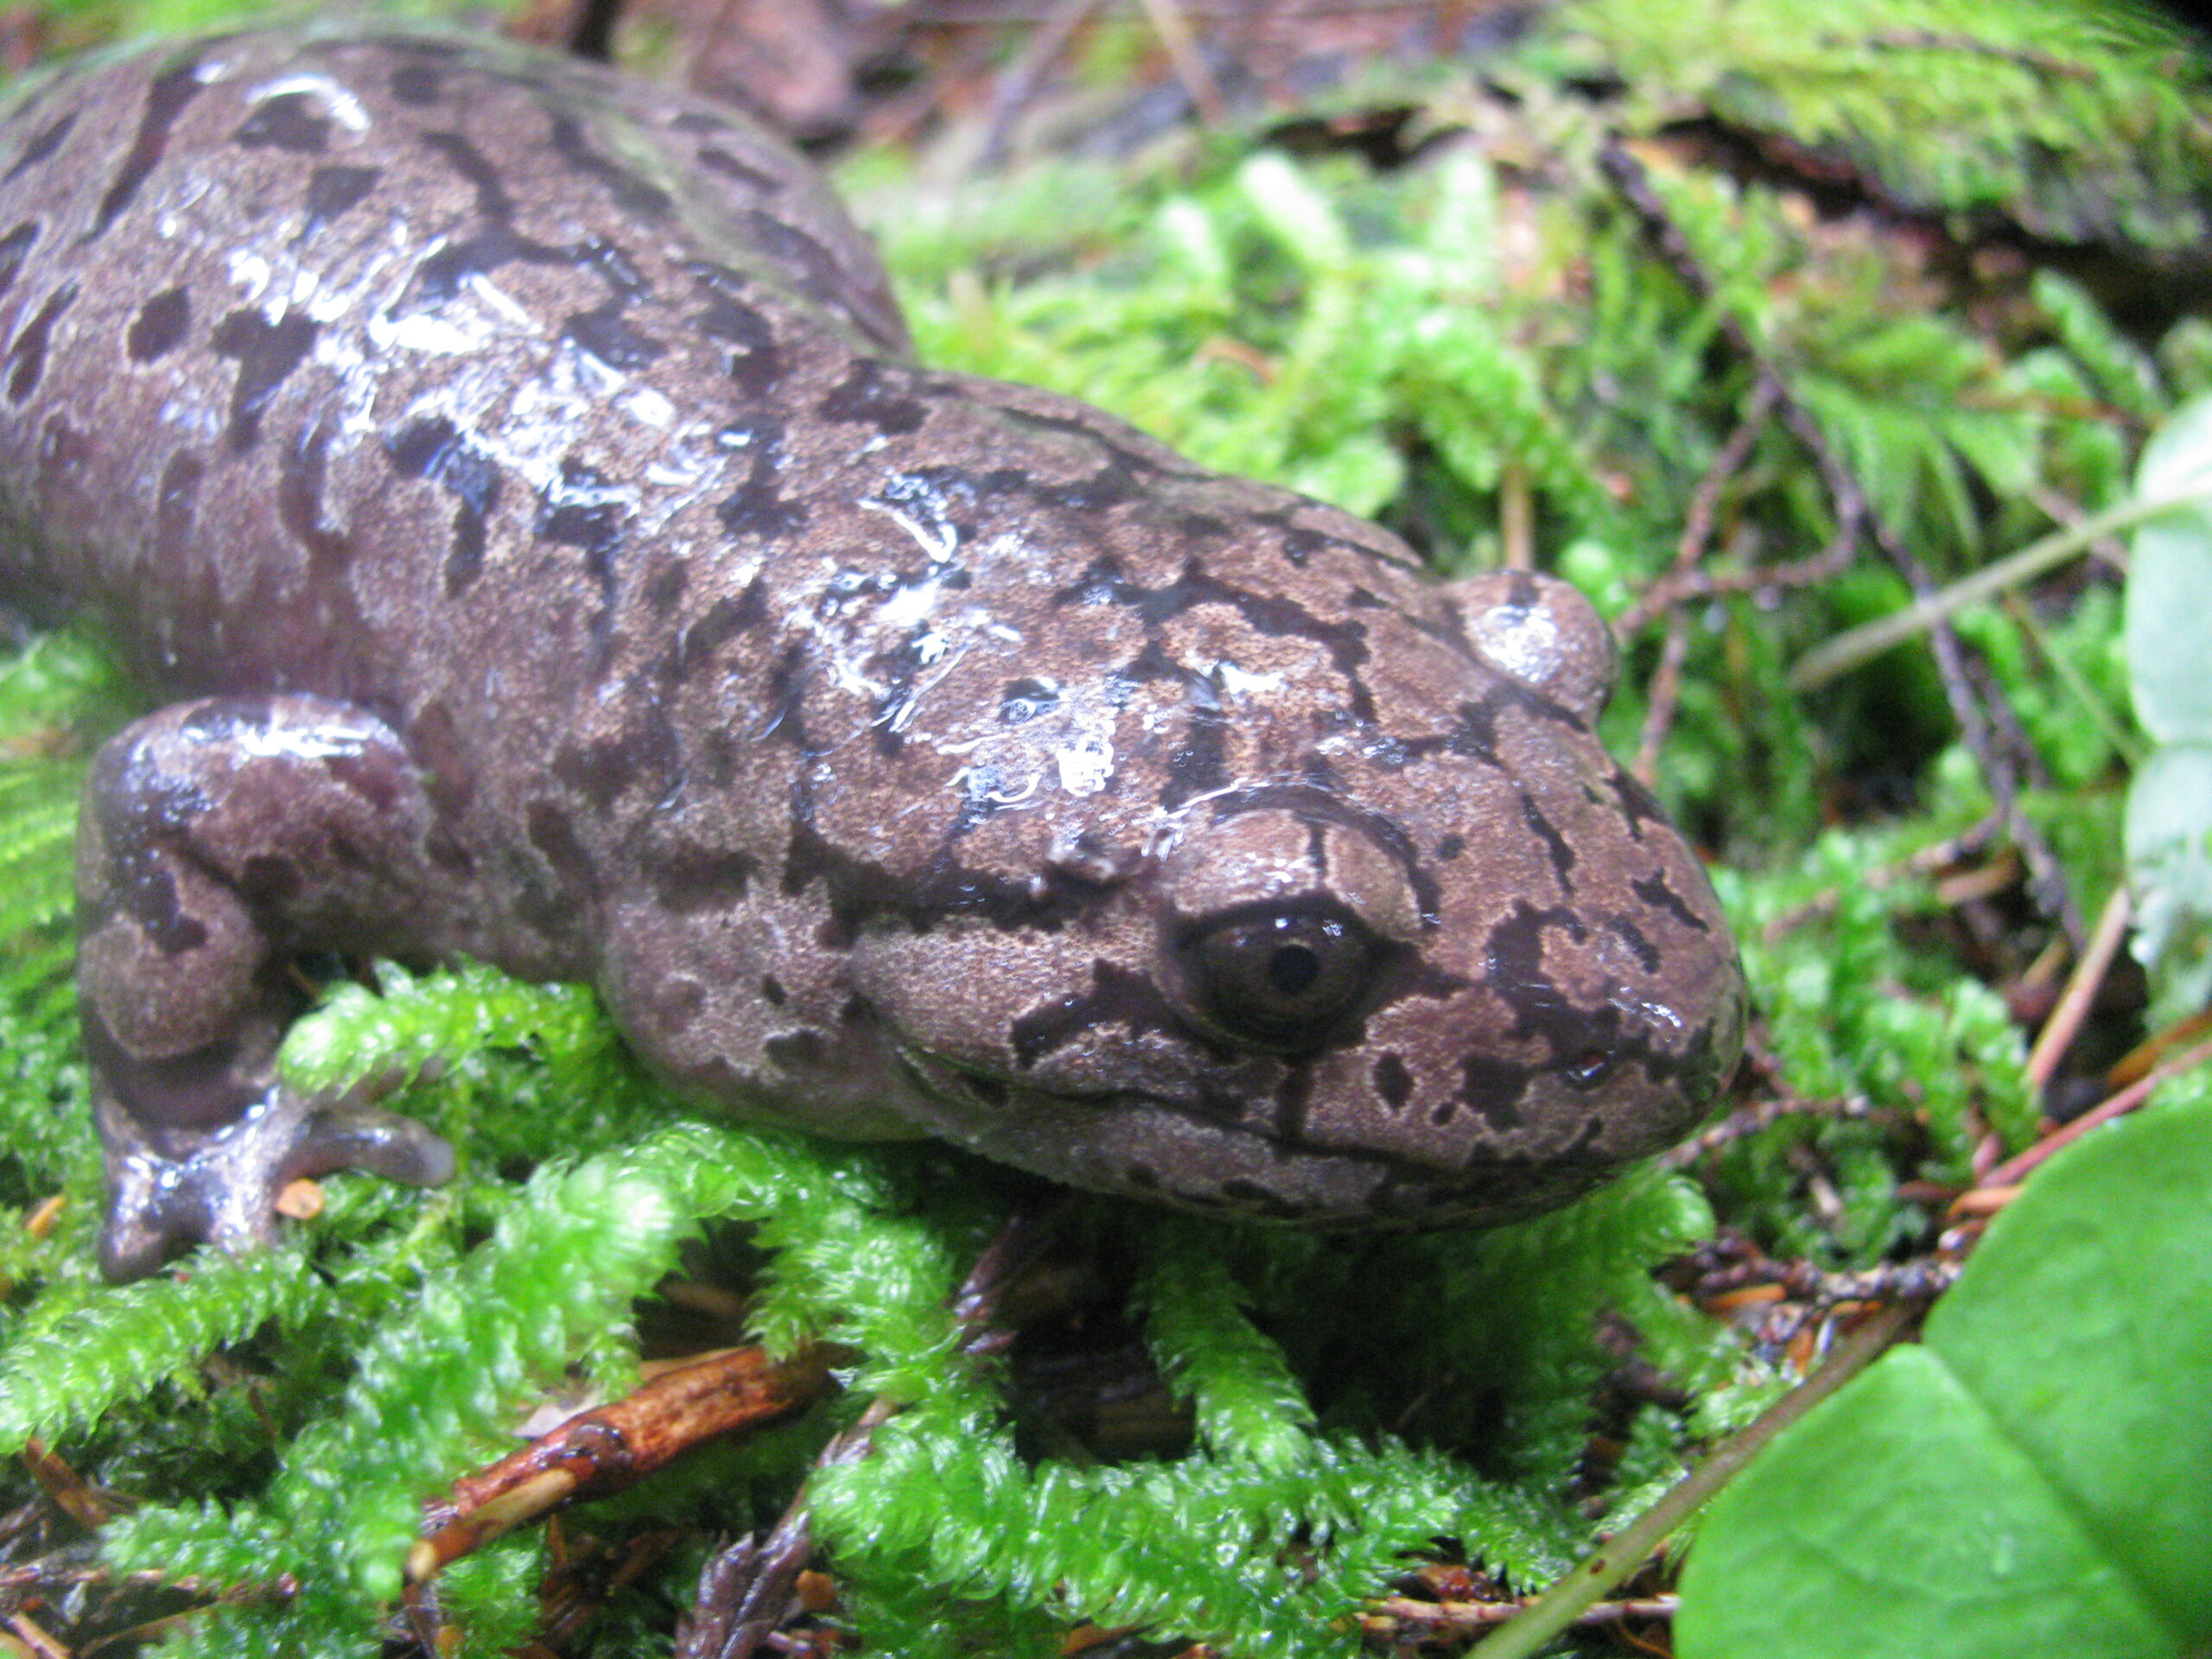 This is a close-up of a Pacific Giant Salamander amongst some neon green moss within the Horseshoe Timber Sale area.